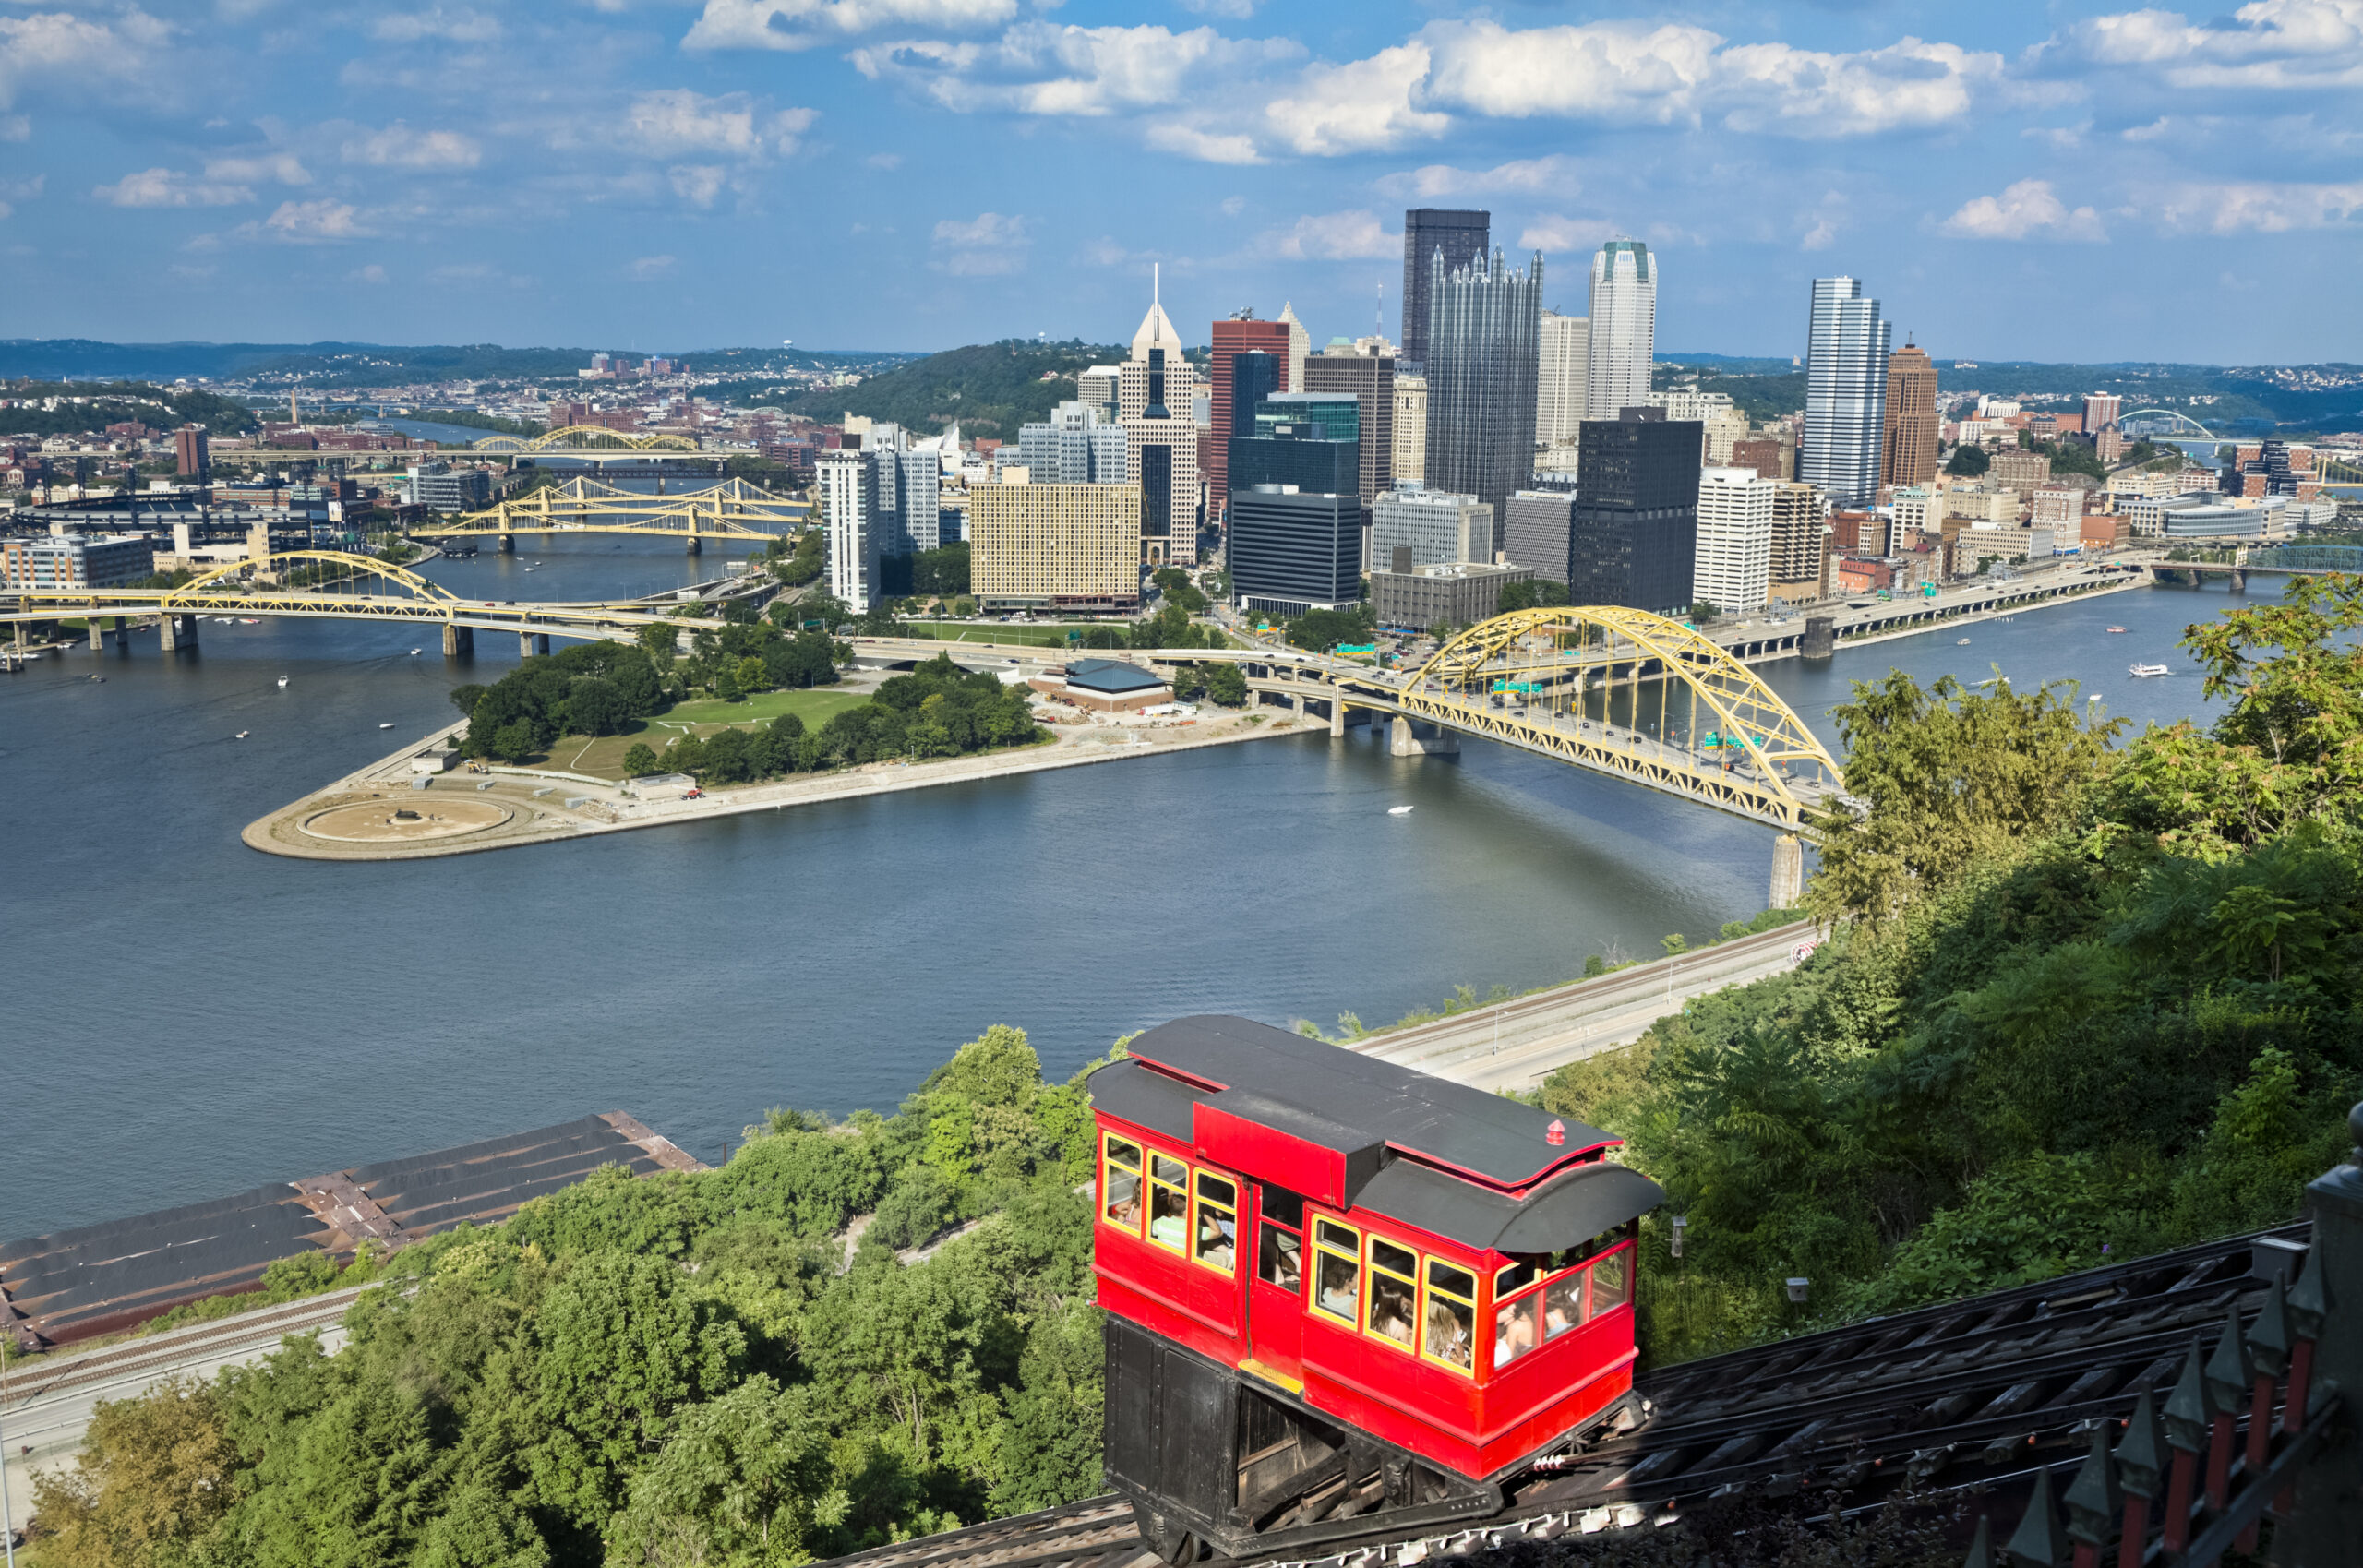 Duquesne Incline With Bright Red Cablecar in pittsburgh, pennsylvania